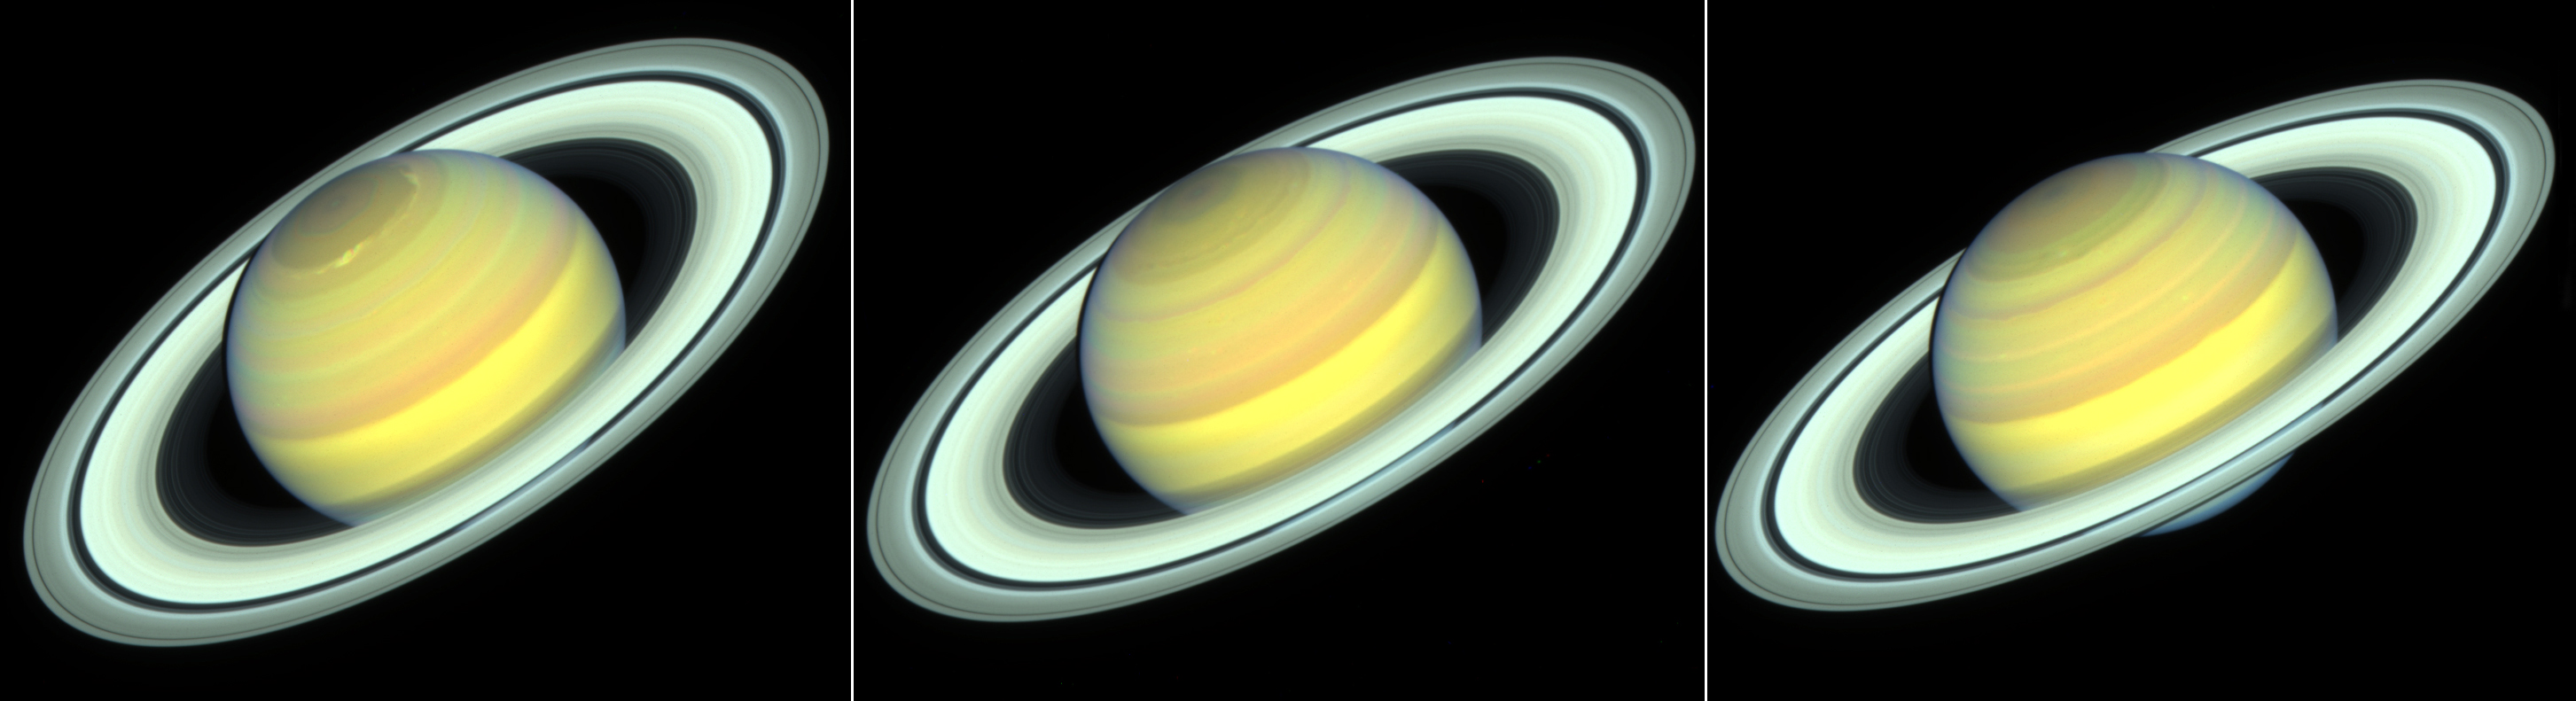 Saturn's Rings will Disappear in 2025. Don't Worry, They'll Return Soon  Enough - Universe Today